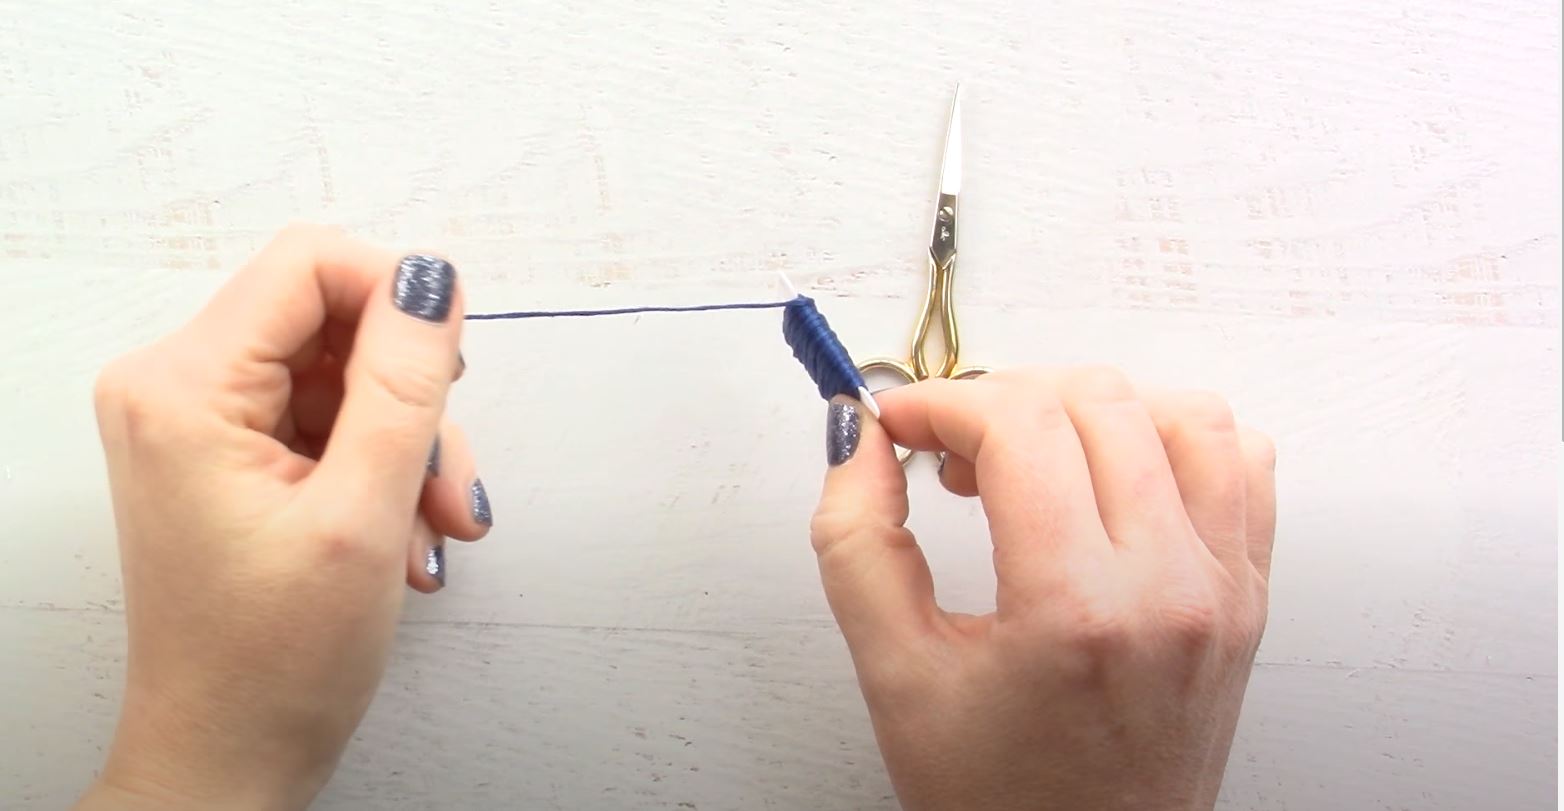 Preparing Your Thread for Embroidery